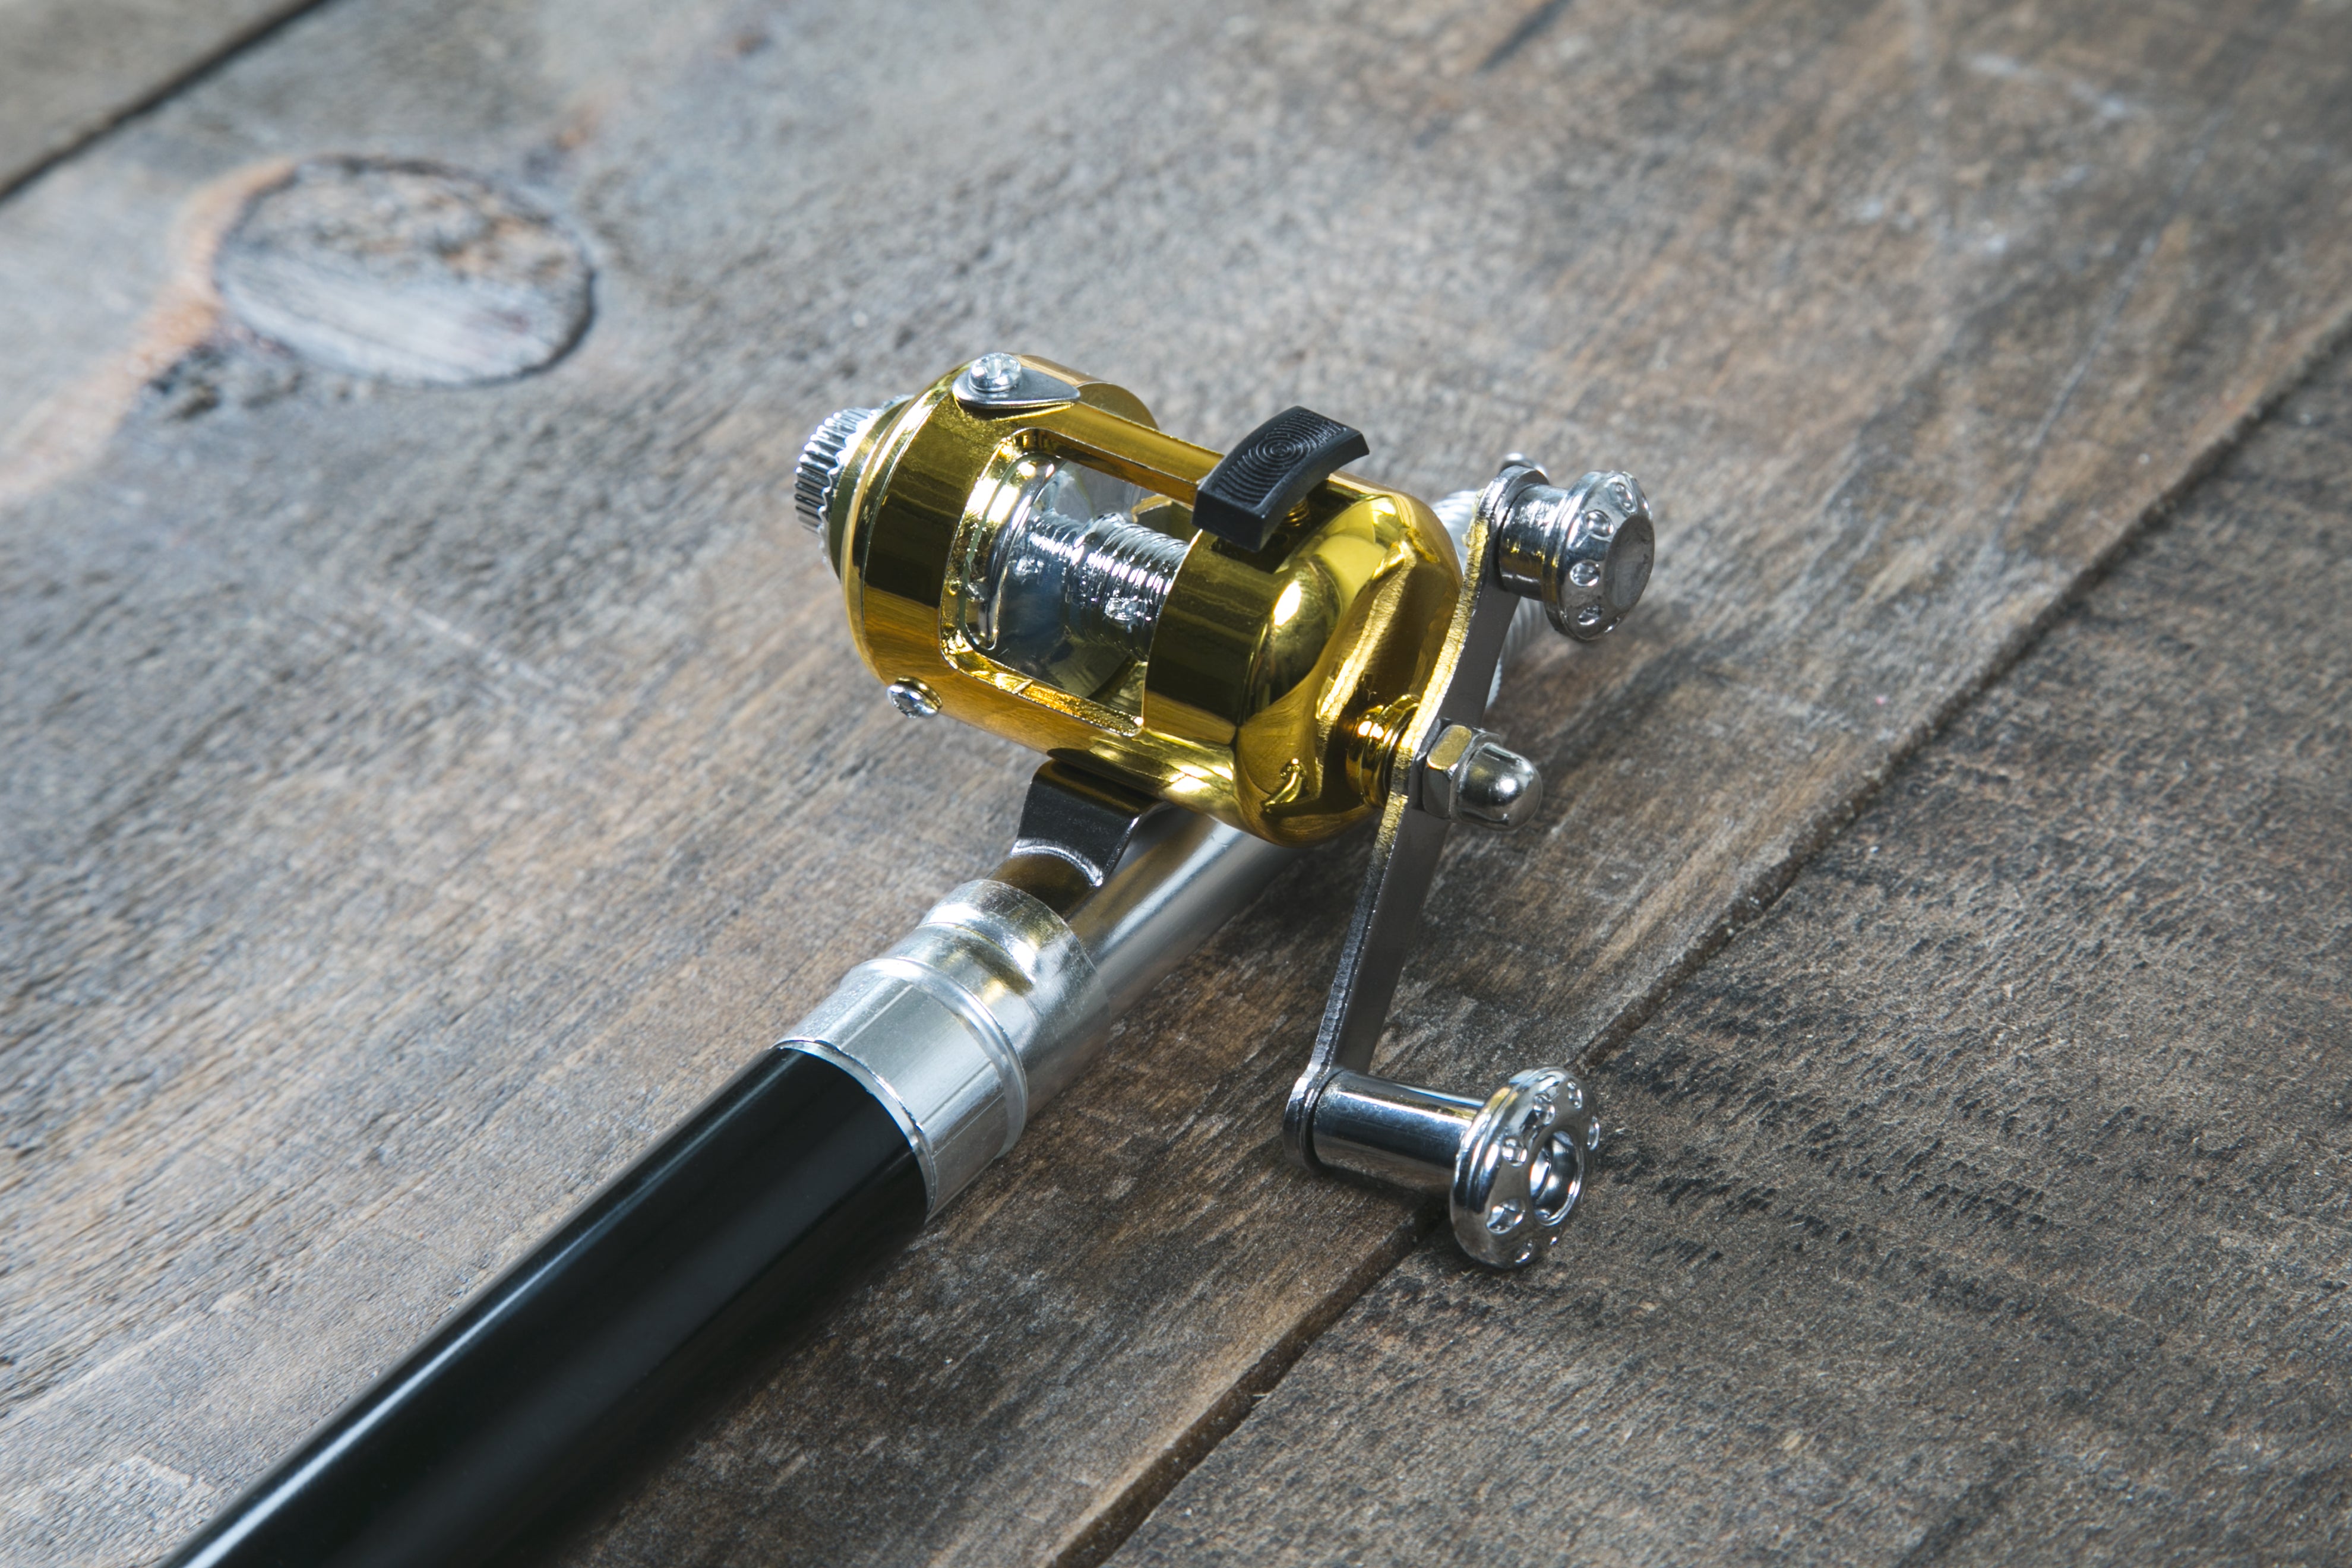 Browse Free HD Images of Fishing Rod & Reel